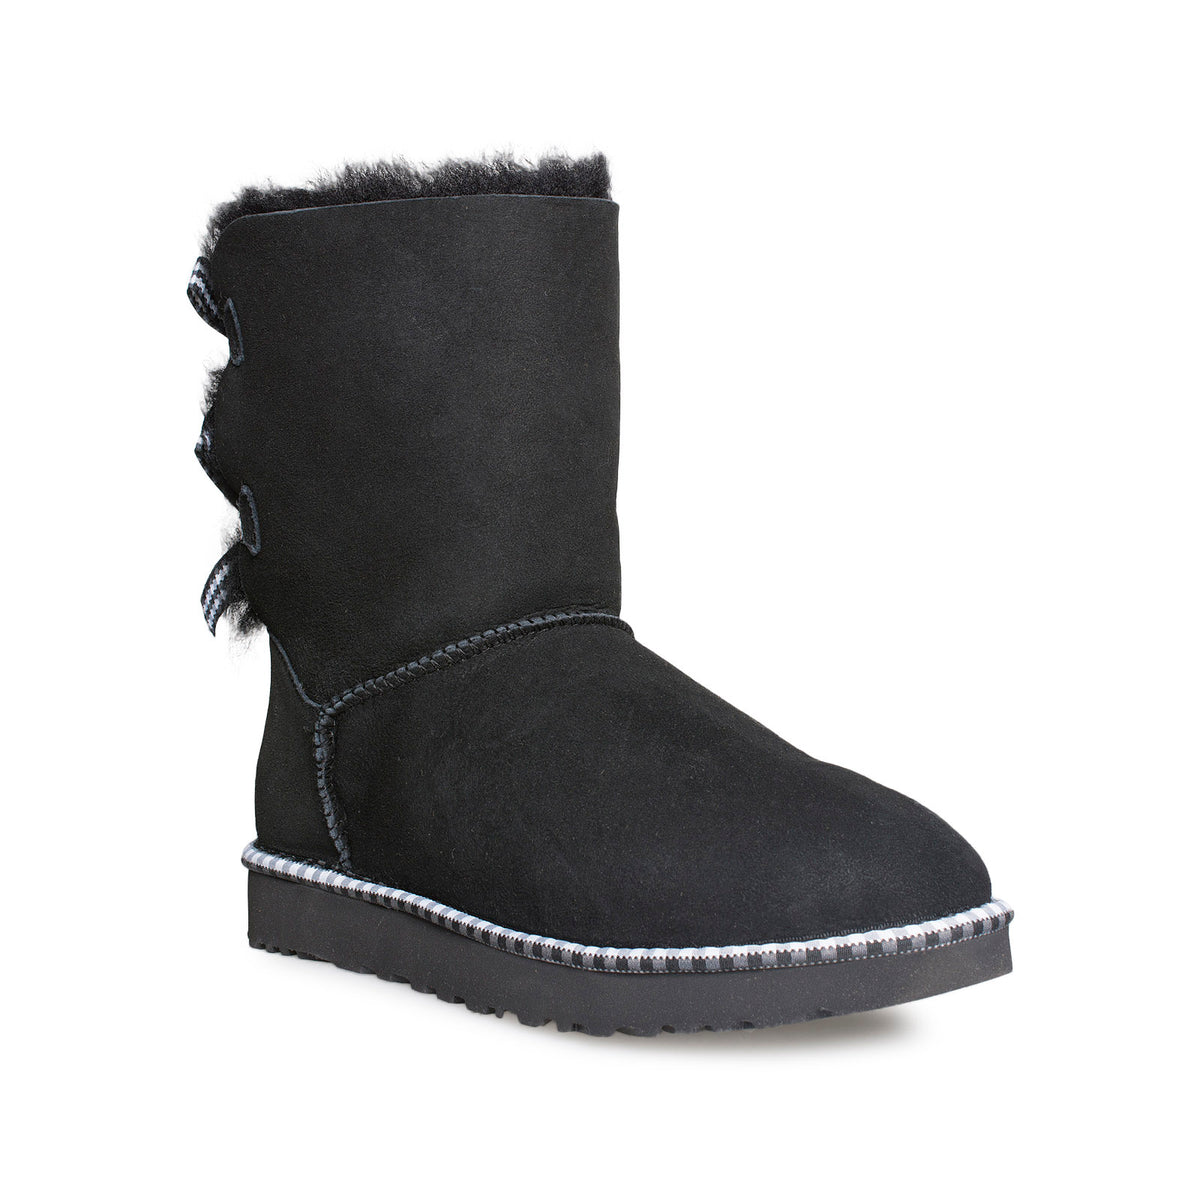 UGG Bailey Bow Gingham Black Boots - Women's – MyCozyBoots